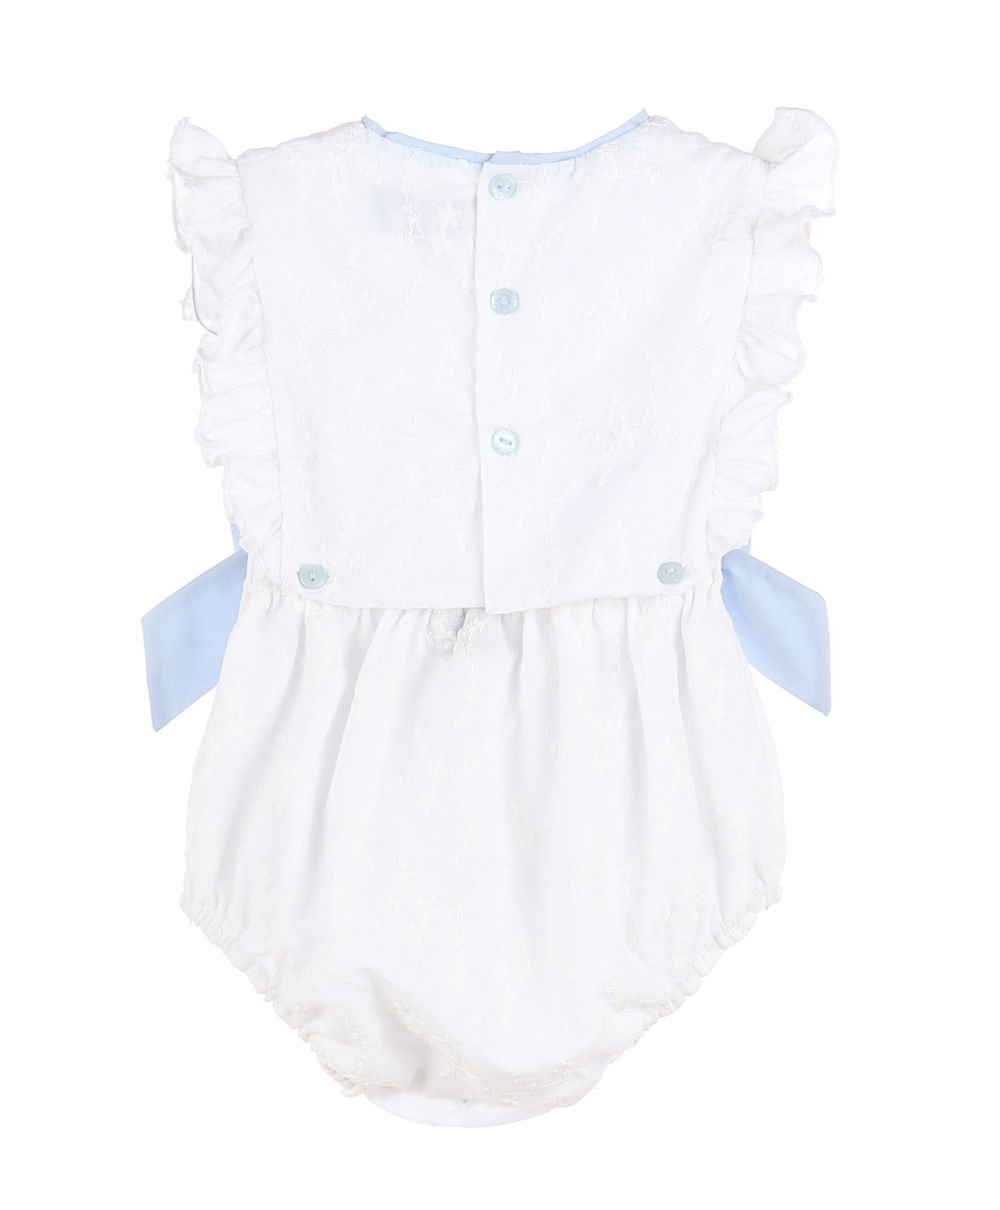 White & Blue Classic Overall With Bows